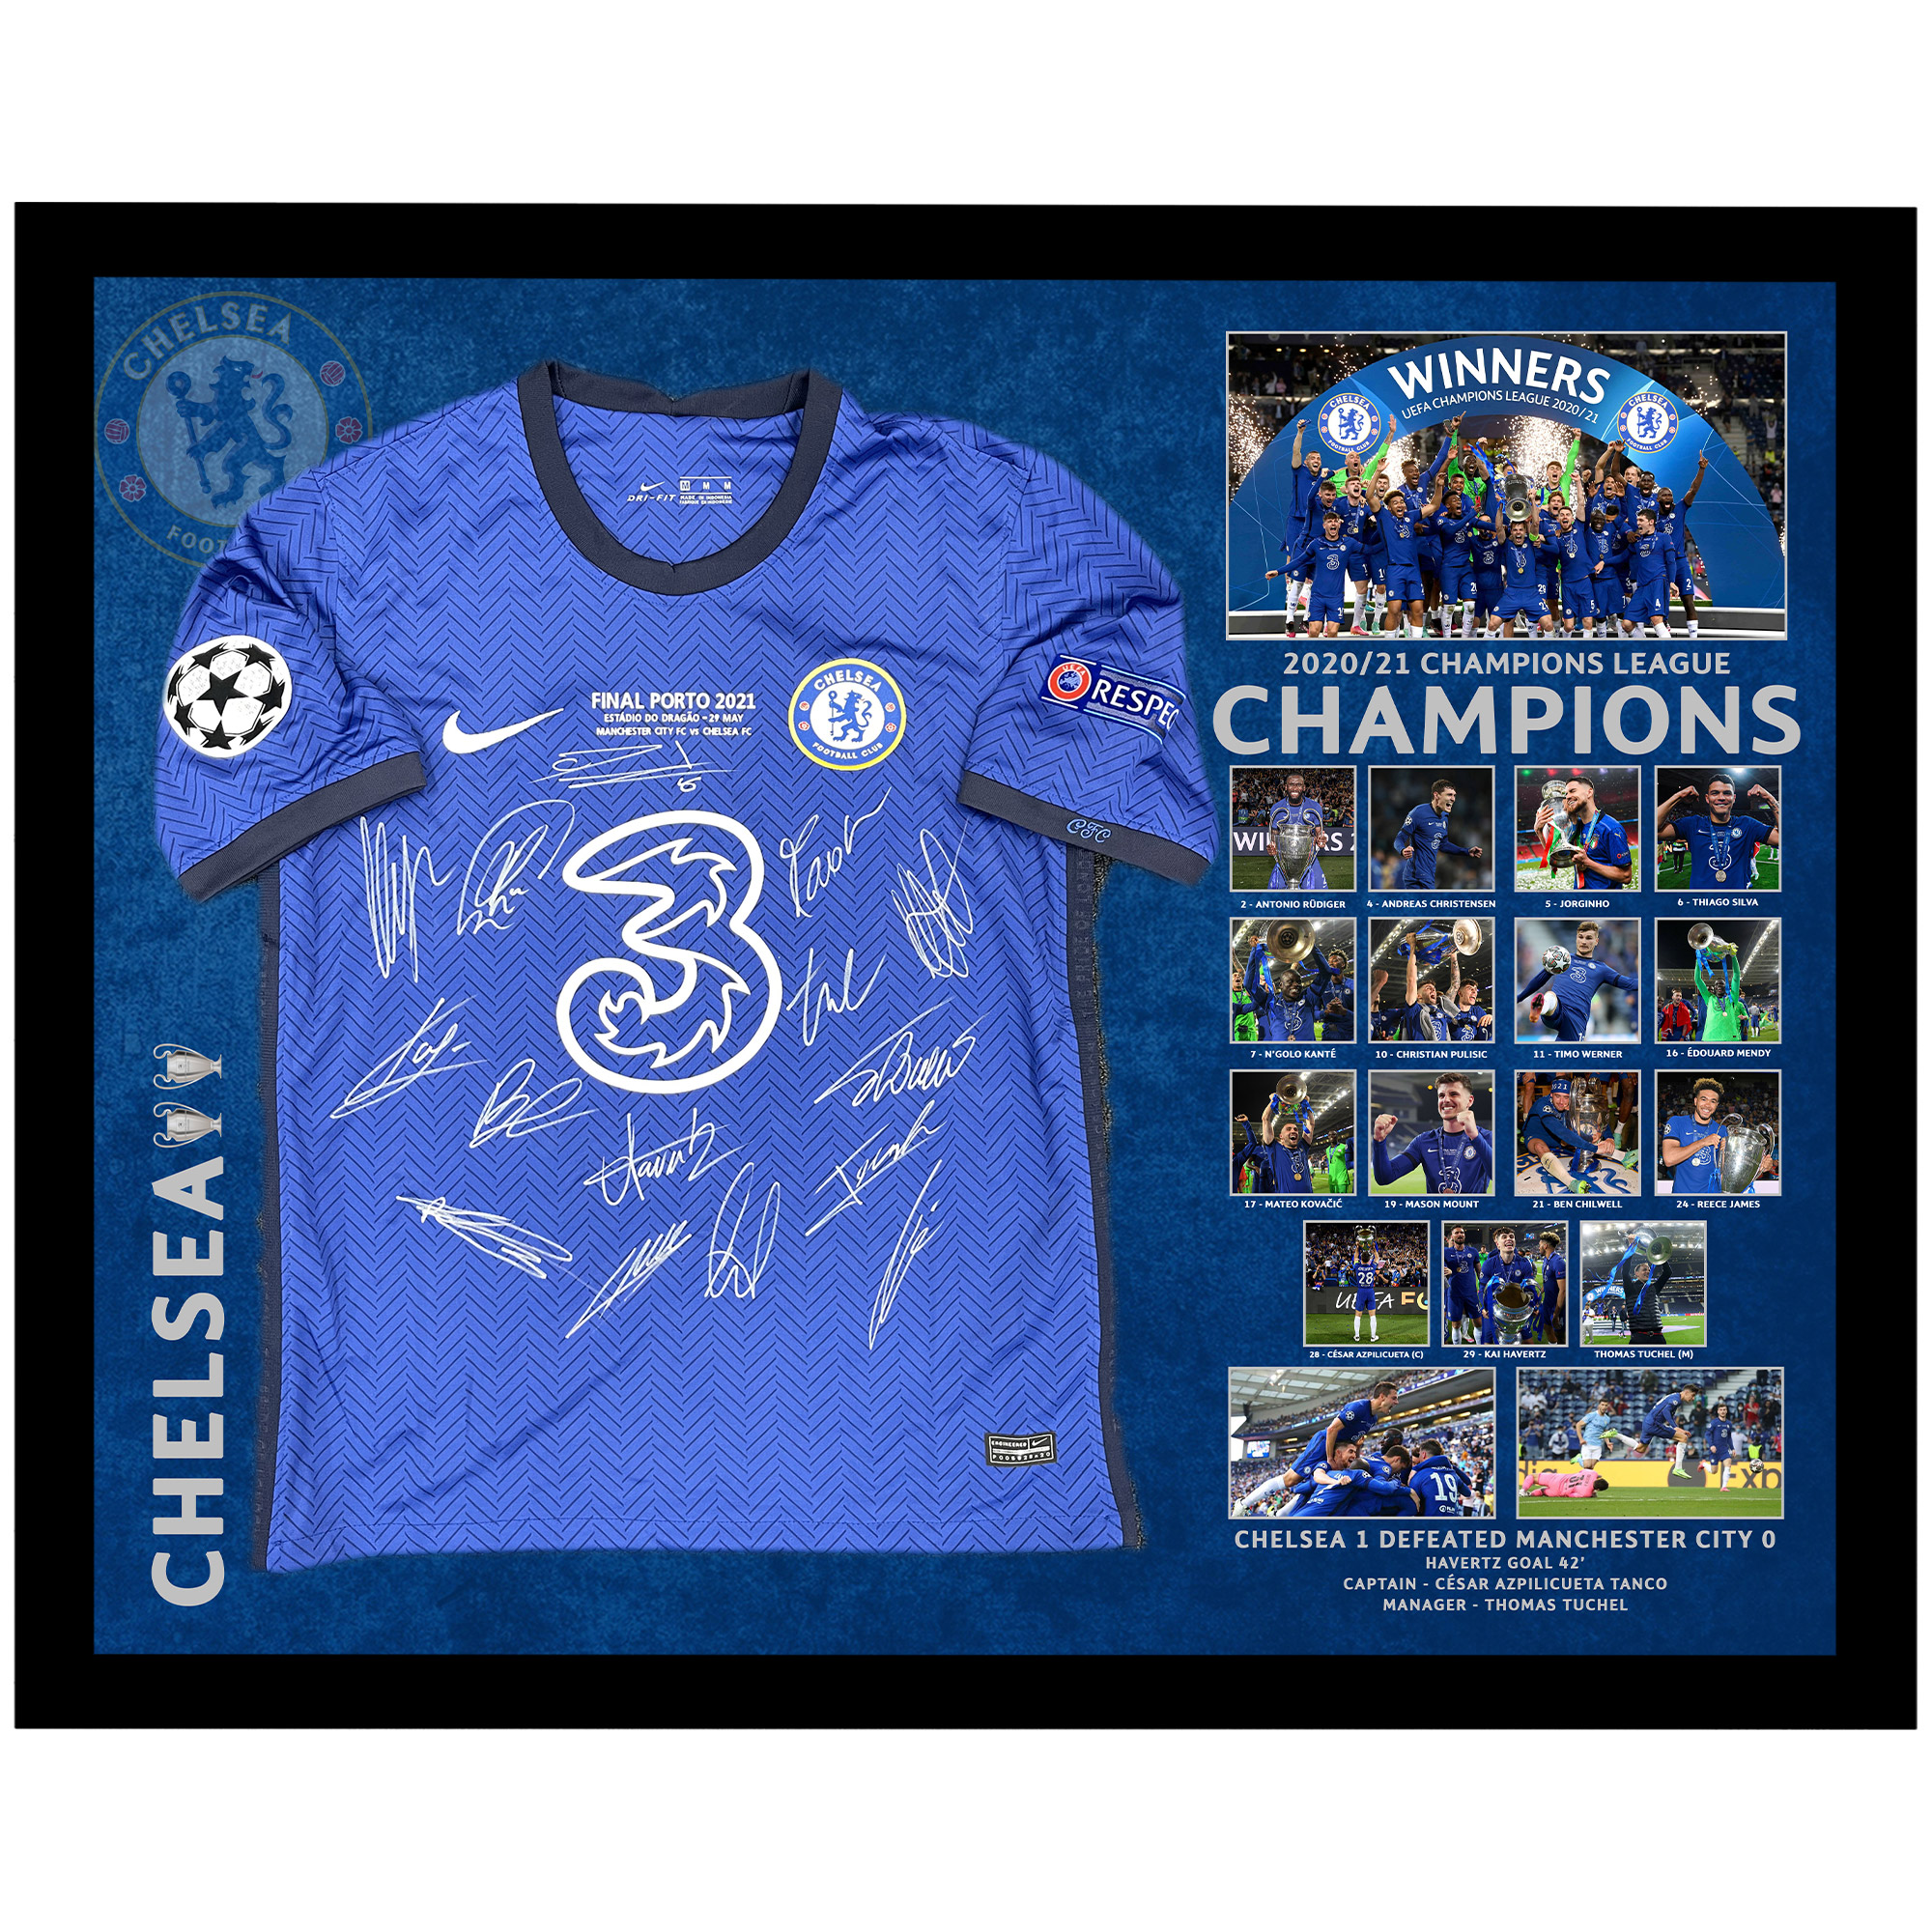 Chelsea FC 2020/21 Champions League Champions Signed Framed Jersey